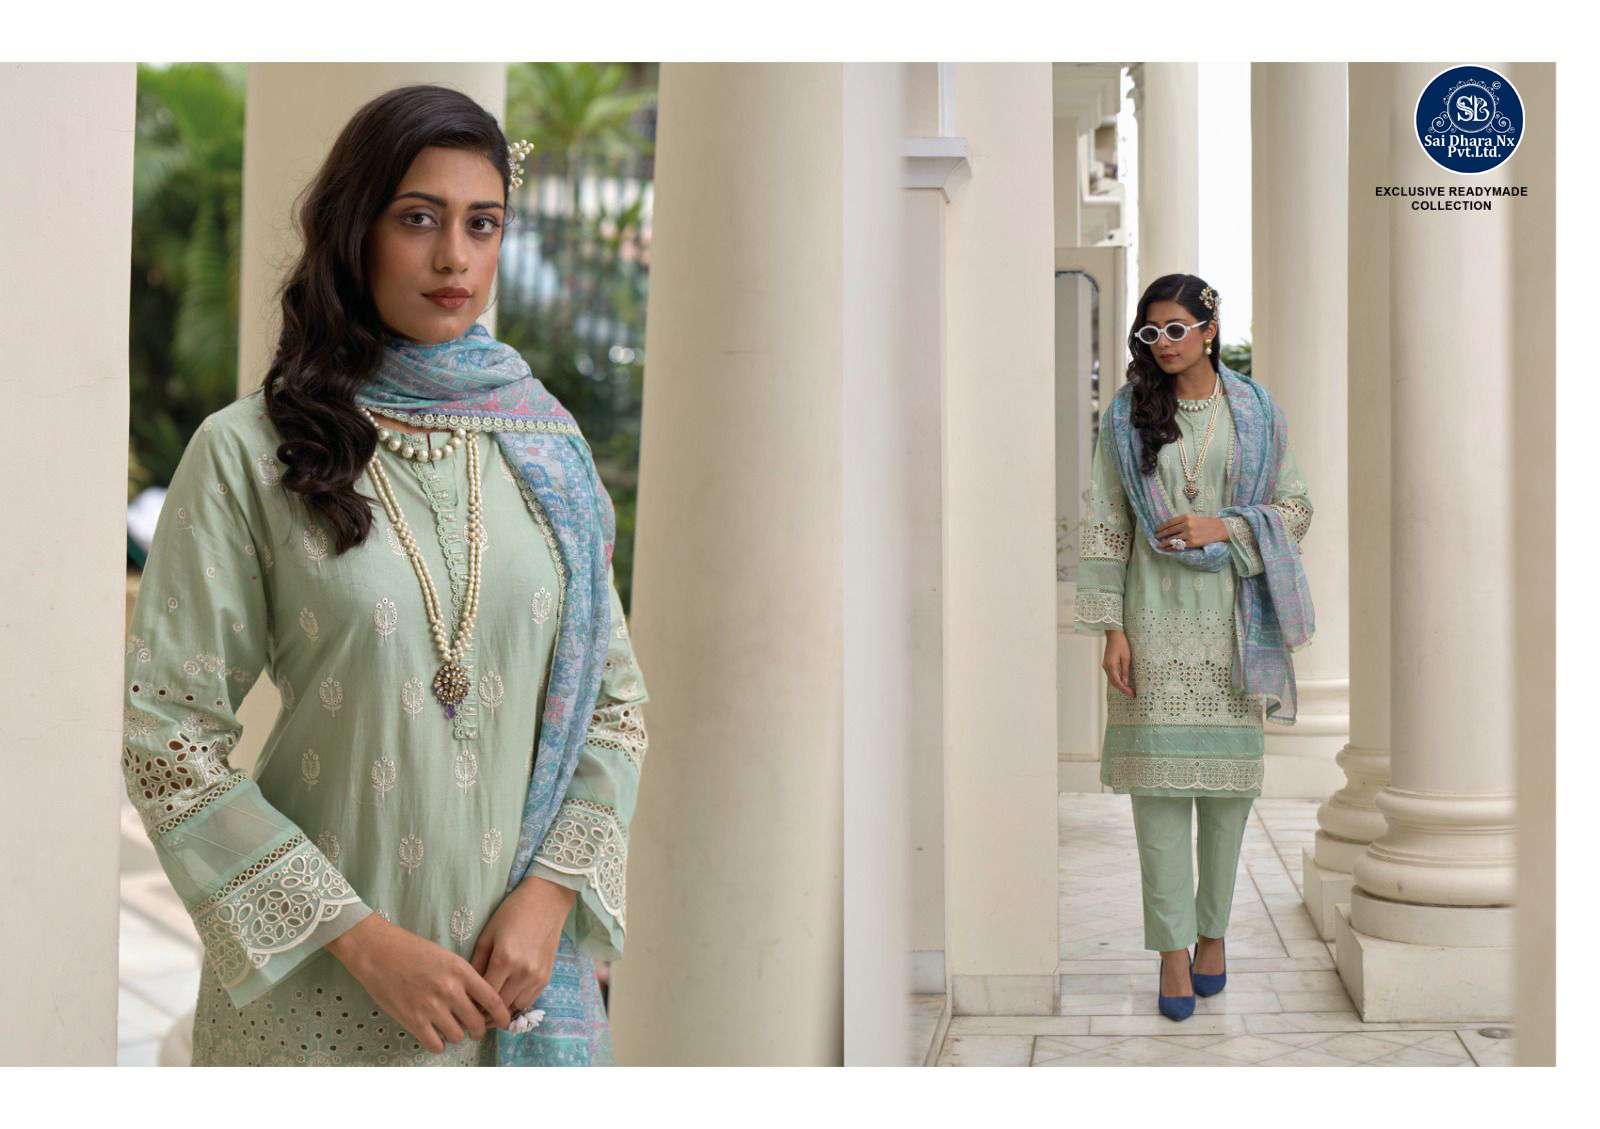 SHREE FABS PRESENTS TOP PURE LAWN COTTON WITH SCHIFFLI WORK READYMADE SUIT WHOLESALE SHOP IN SURAT - SaiDharaNx